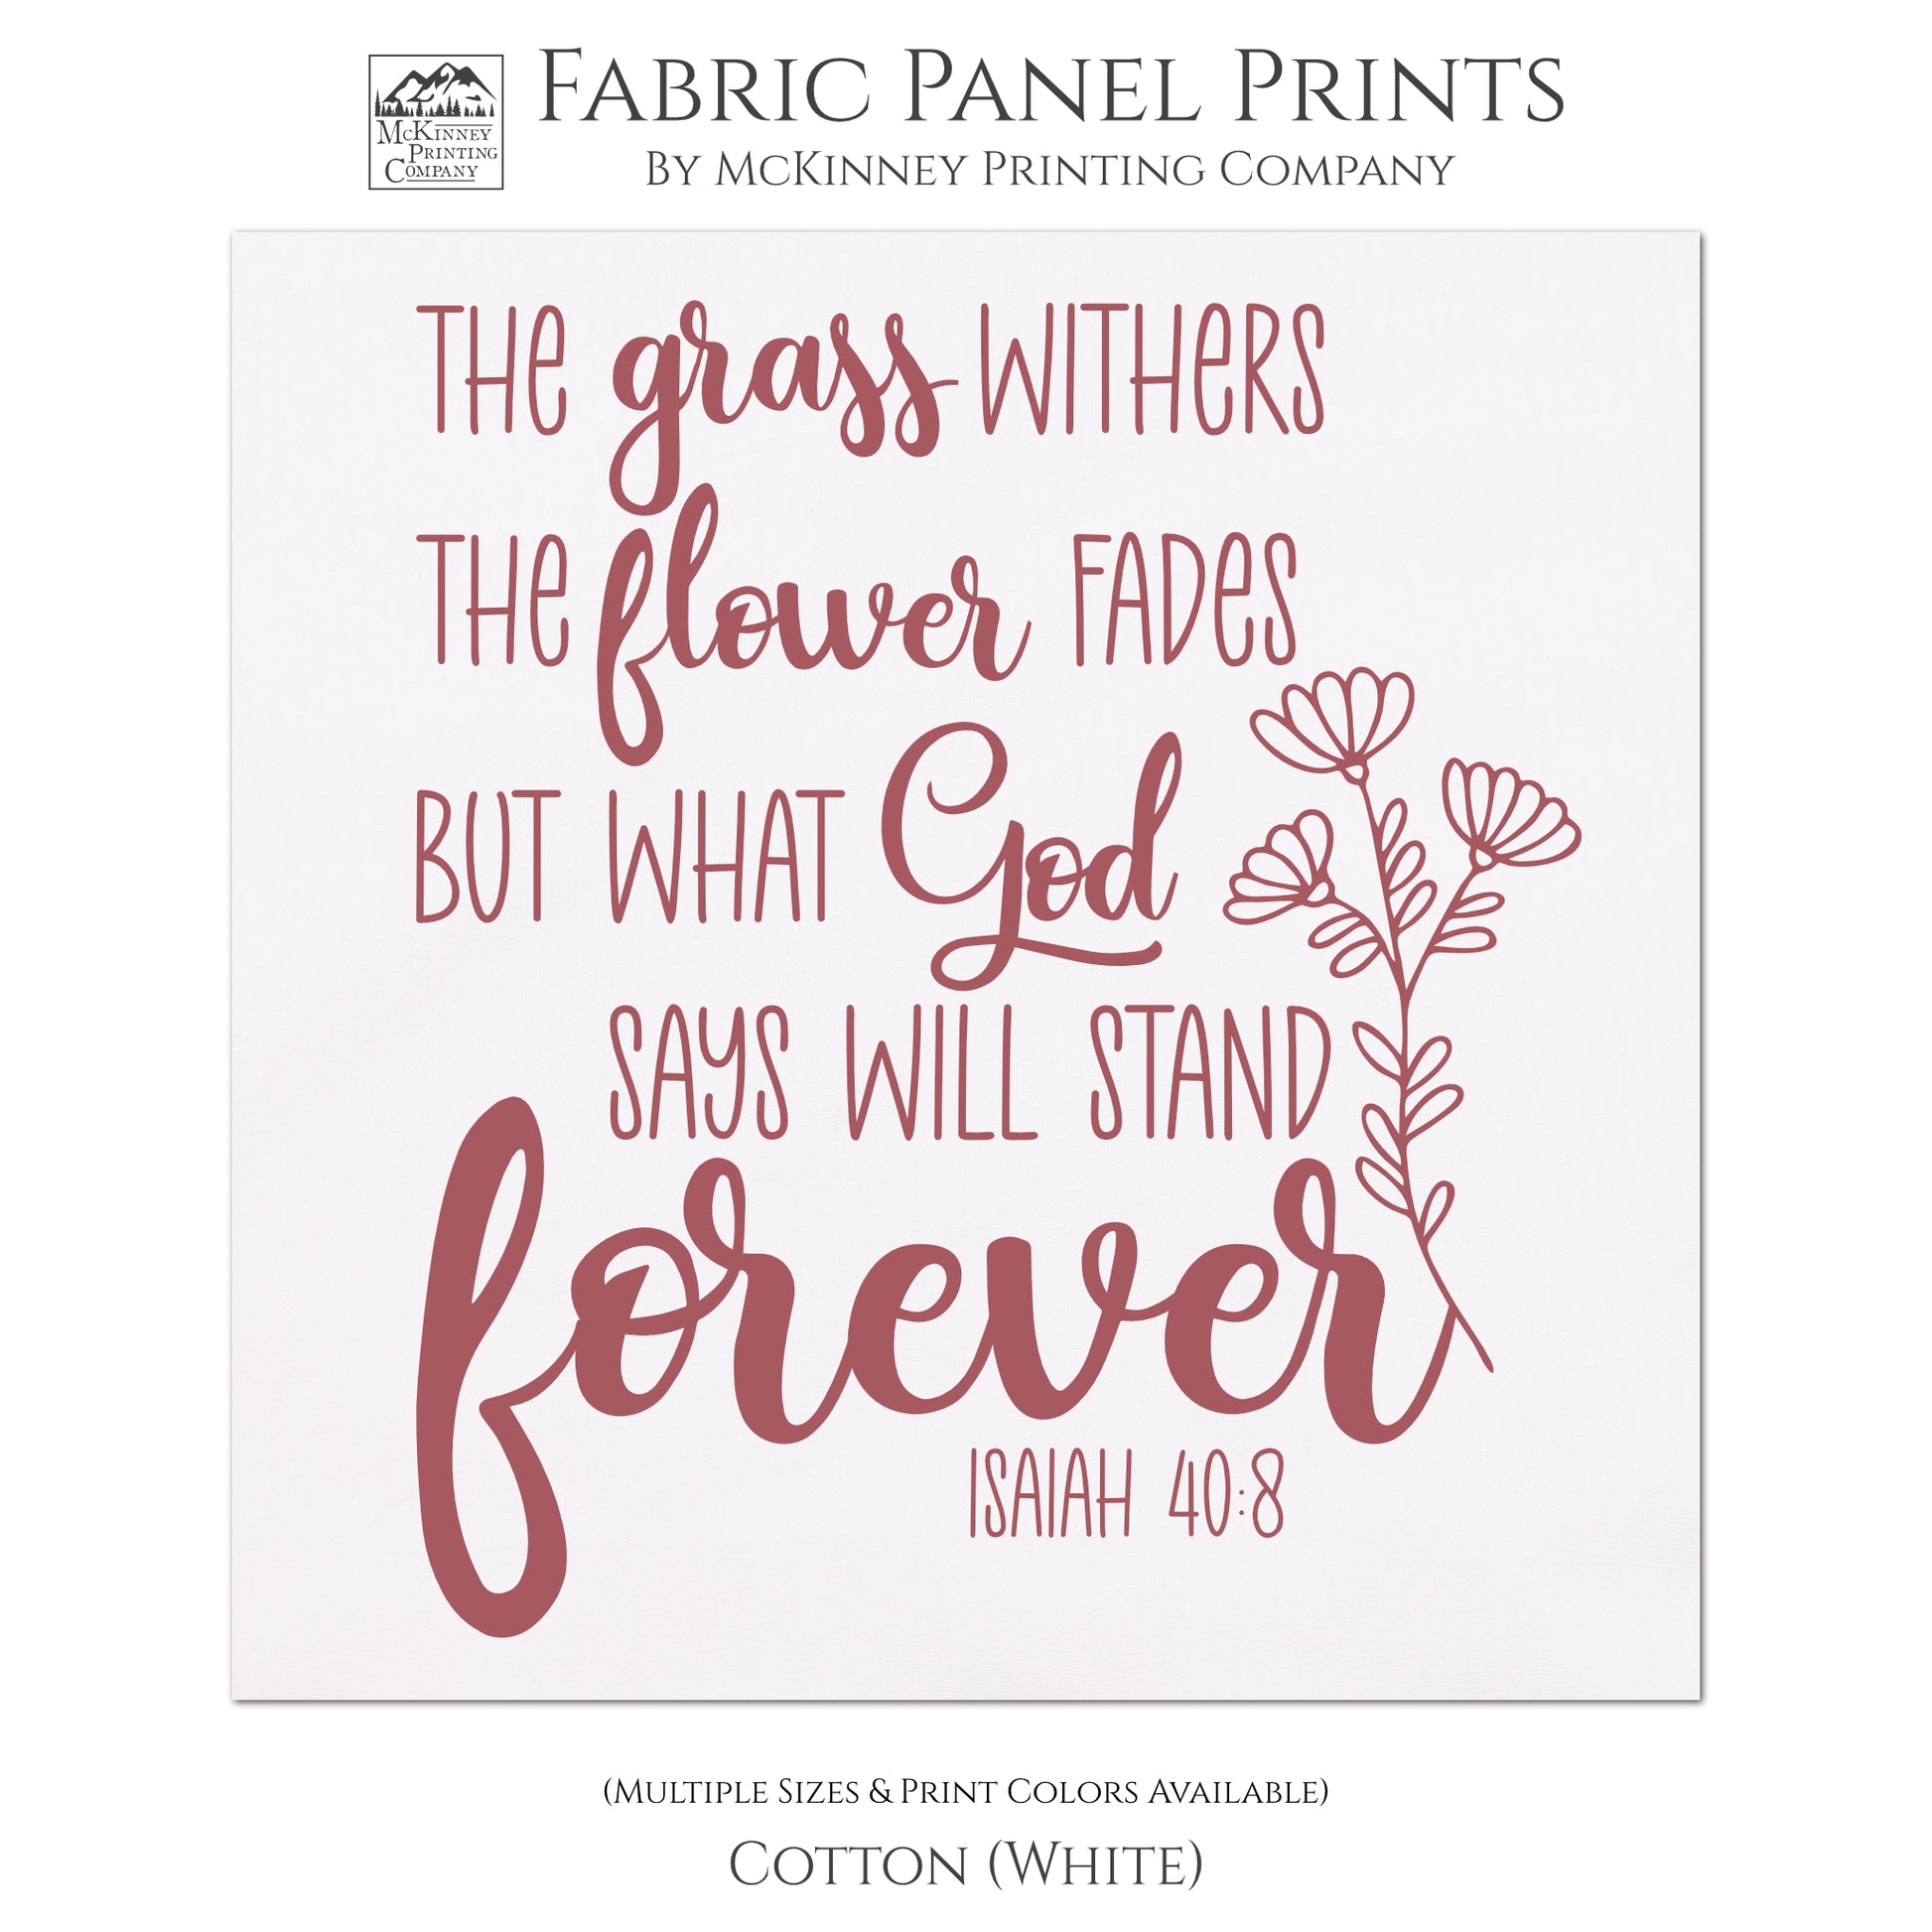 The Grass withers the flower fades but what God says will stand forever. - Isaiah 40 8, Christian, Religious Fabric, Quilt, Wall Art, Small Print Fabric, Large Print Fabric - Cotton, White